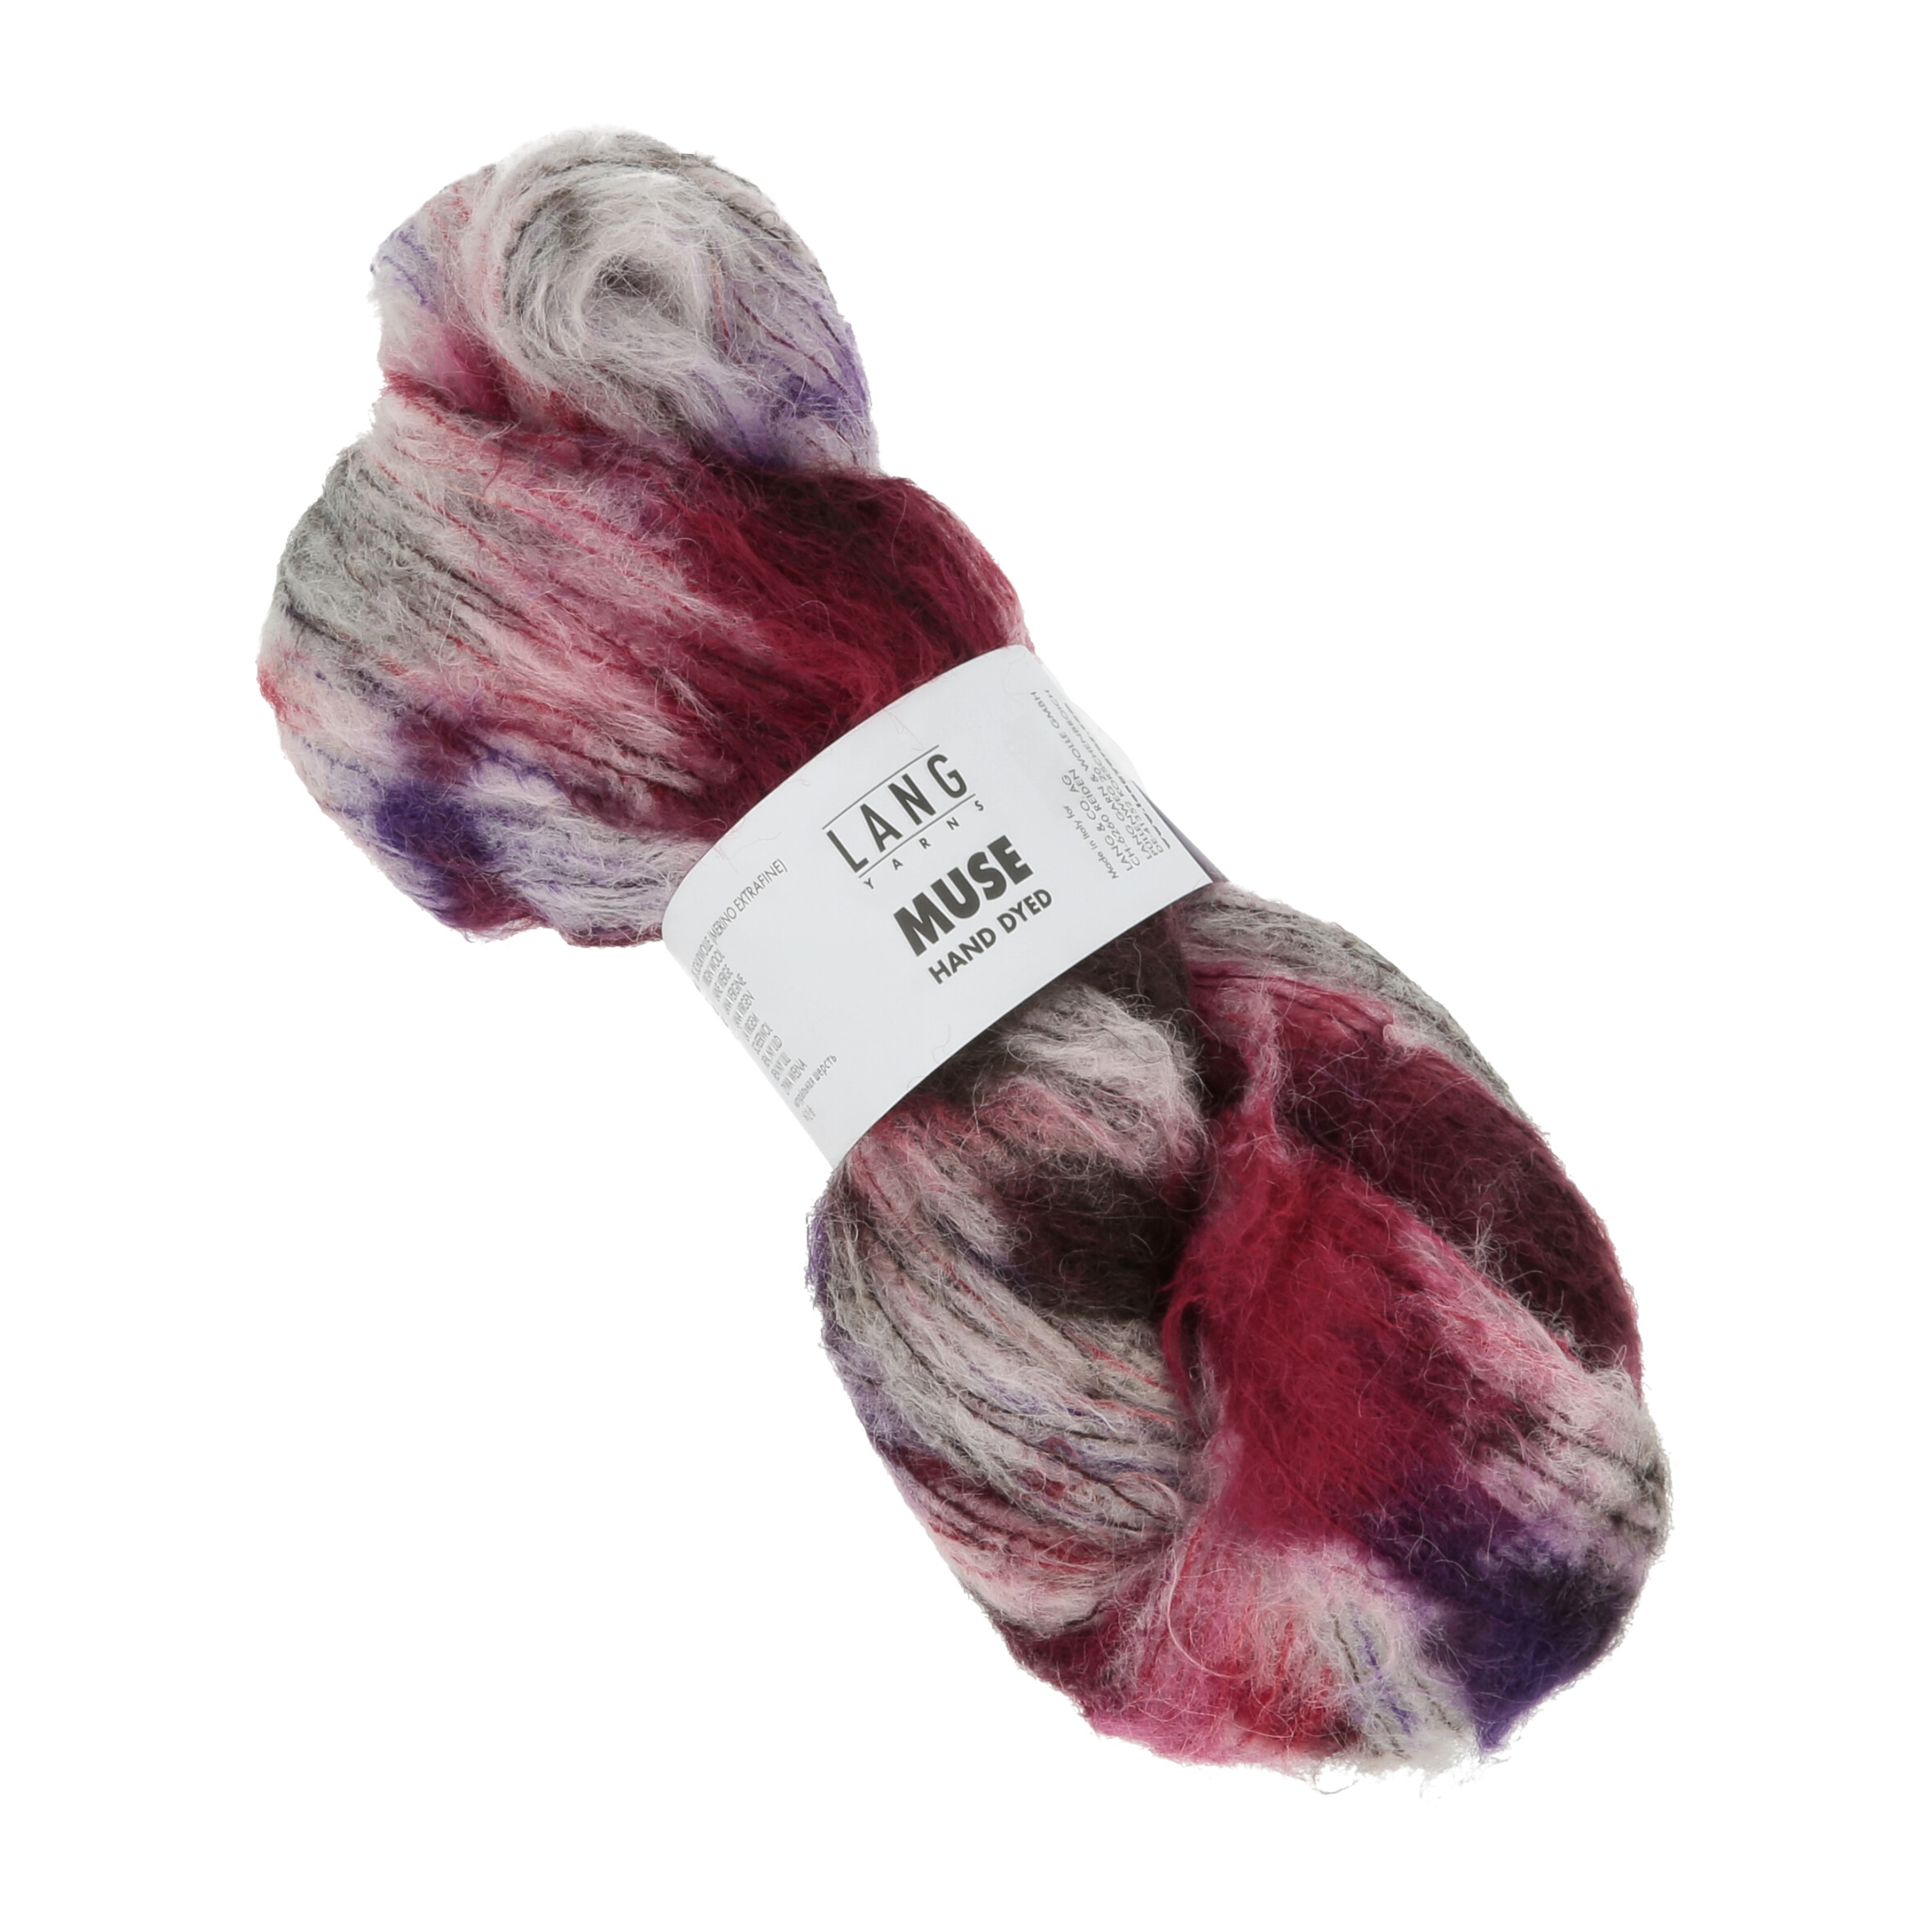 LANG MUSE (HAND DYED) 0001 ROSSO/VIOLA 100GR